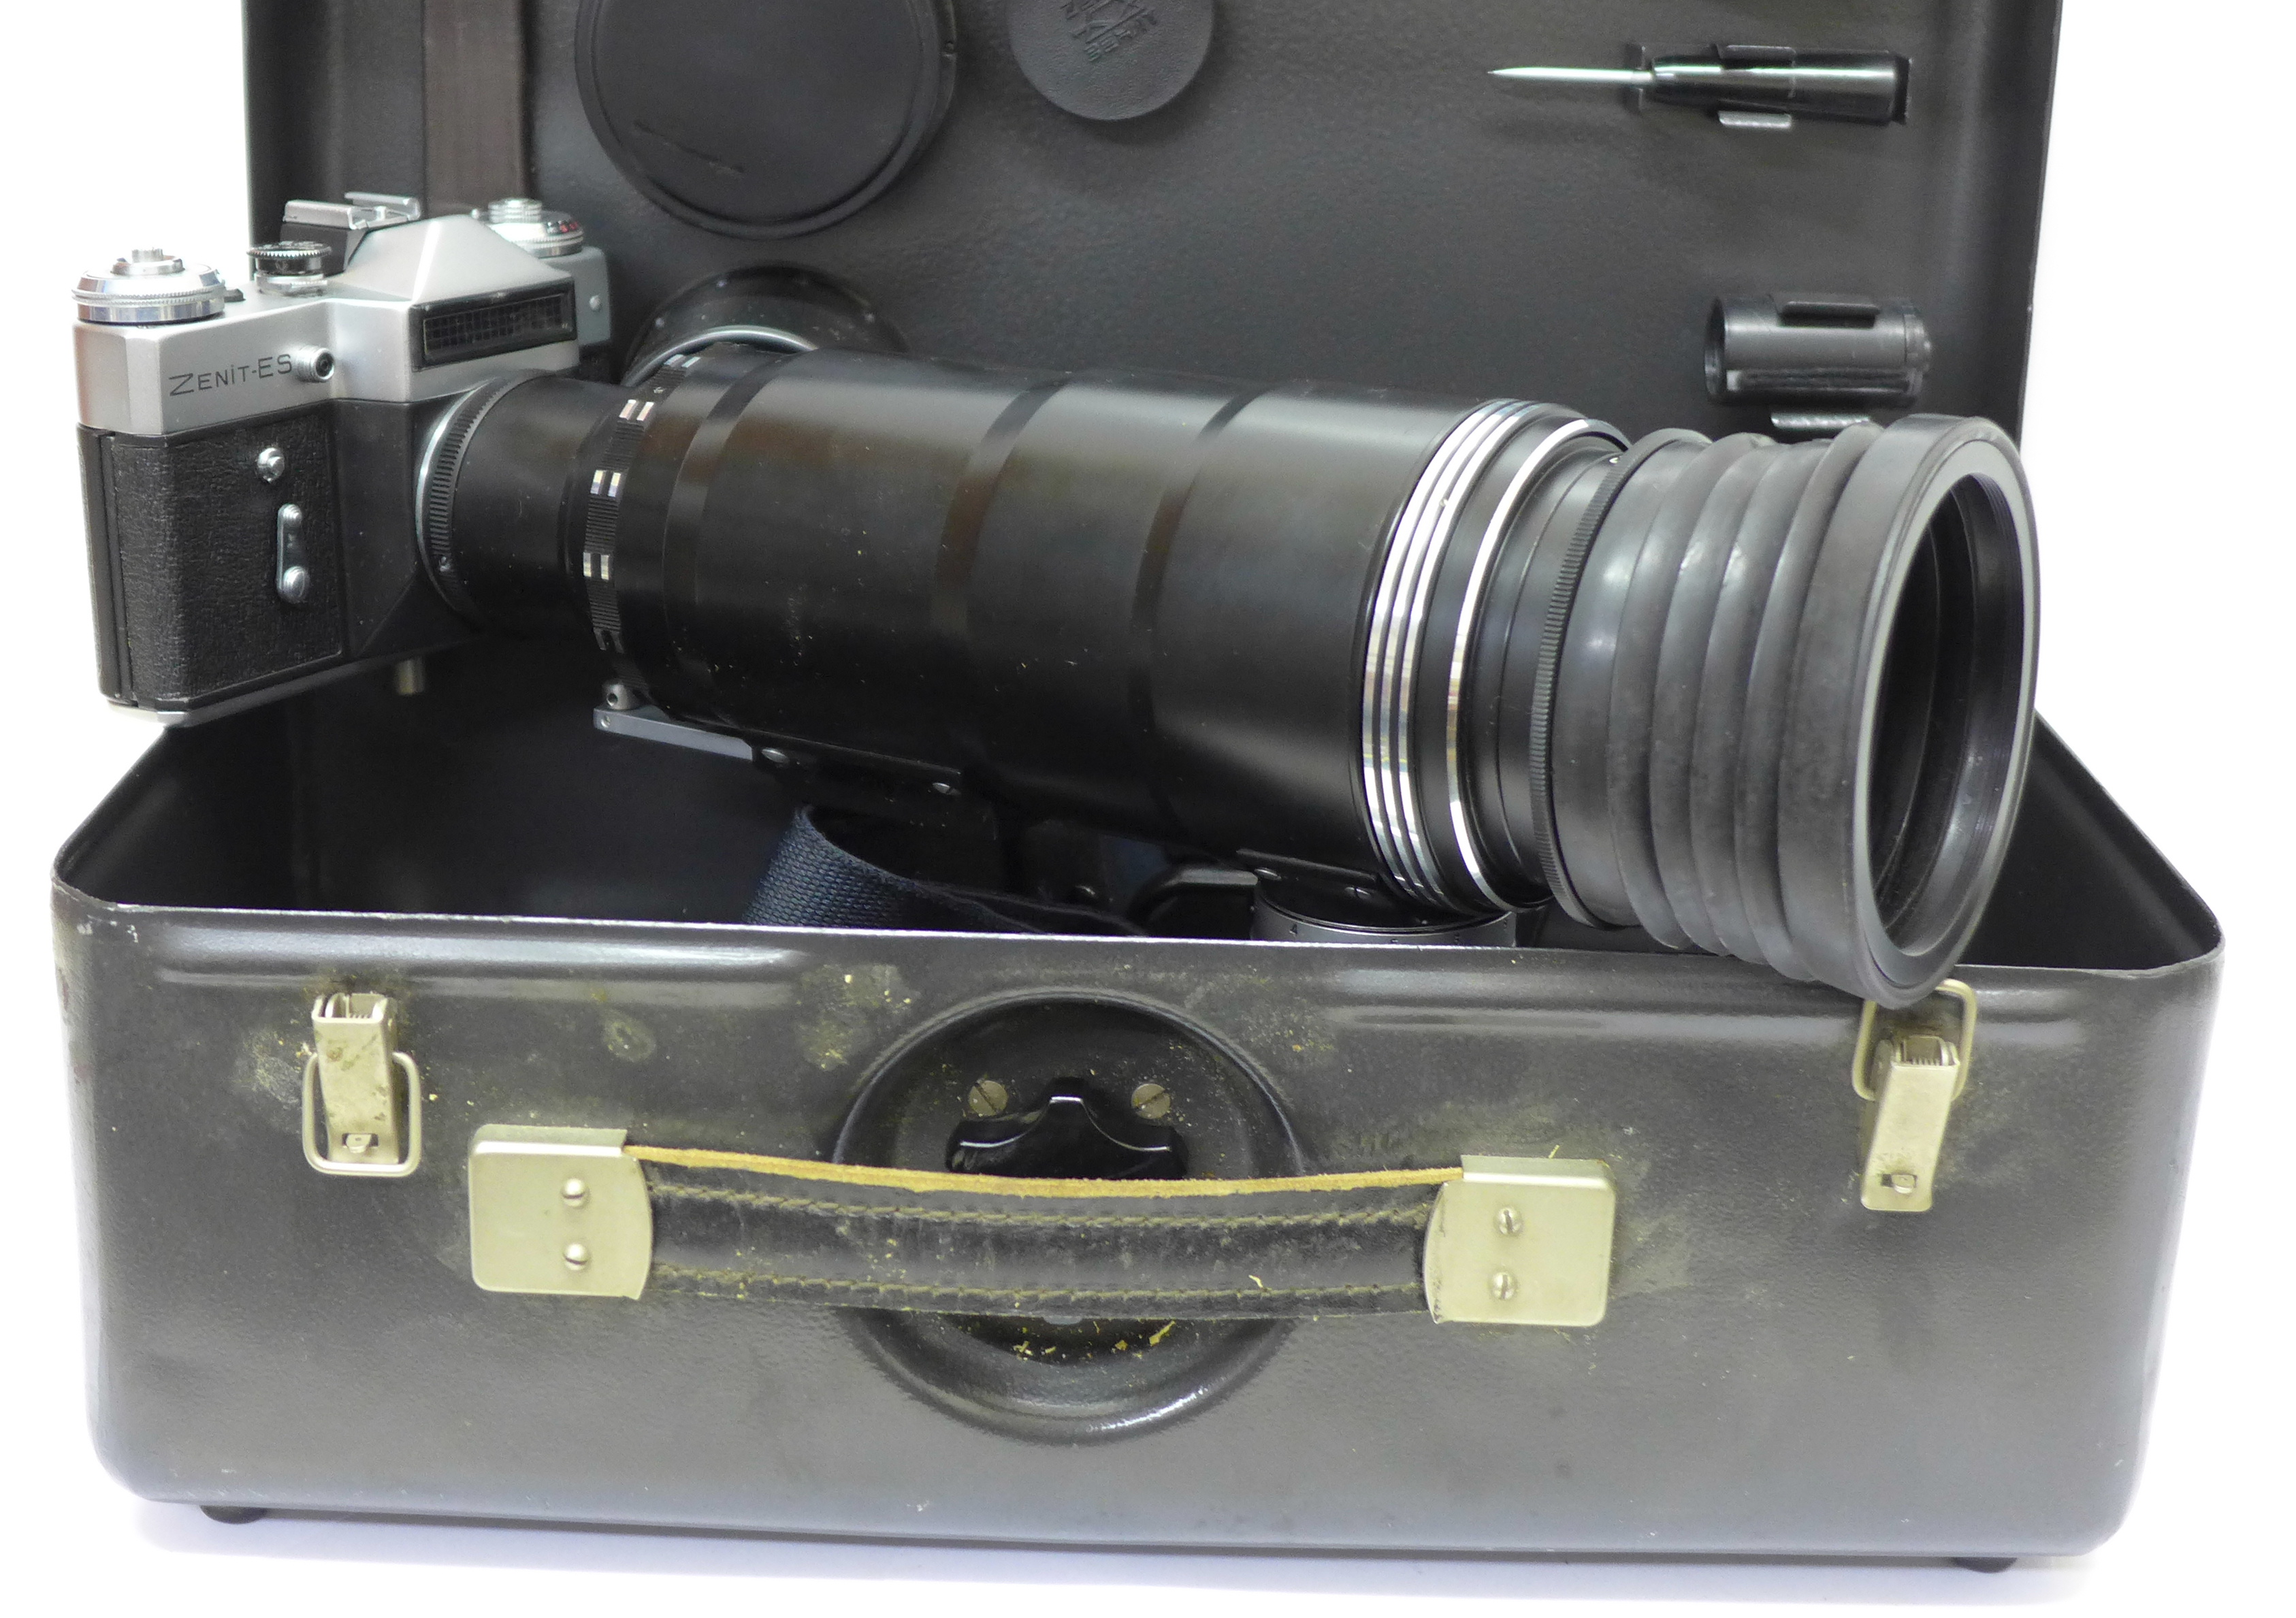 A Zenit-ES 35mm film camera with a USSR TAIR-3-PhS 4.